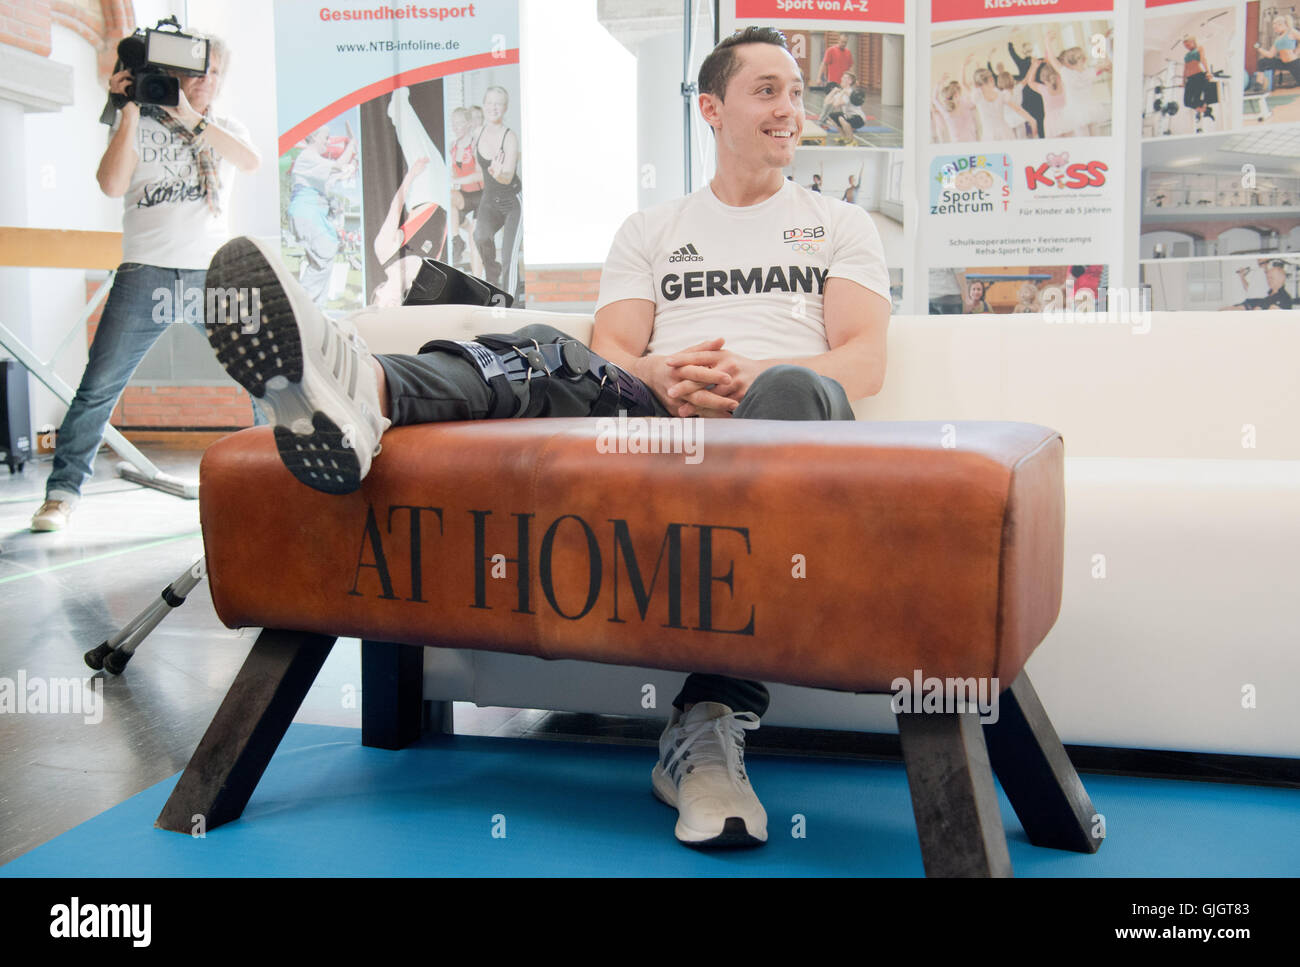 Hanover, Germany. 16th Aug, 2016. Injured gymnast Andreas Toba sitting during a reception by his home club - Turn-Klubb zu Hannover - in Hanover, Germany, 16 August 2016. Toba competed on the pommel horse during the Olympic Games in Rio, despite a cruciate rupture he had suffered previously. He competed despite being in great pain, helping the German squad get through to the team finals. PHOTO: JULIAN STRATENSCHULTE/DPA/Alamy Live News Stock Photo